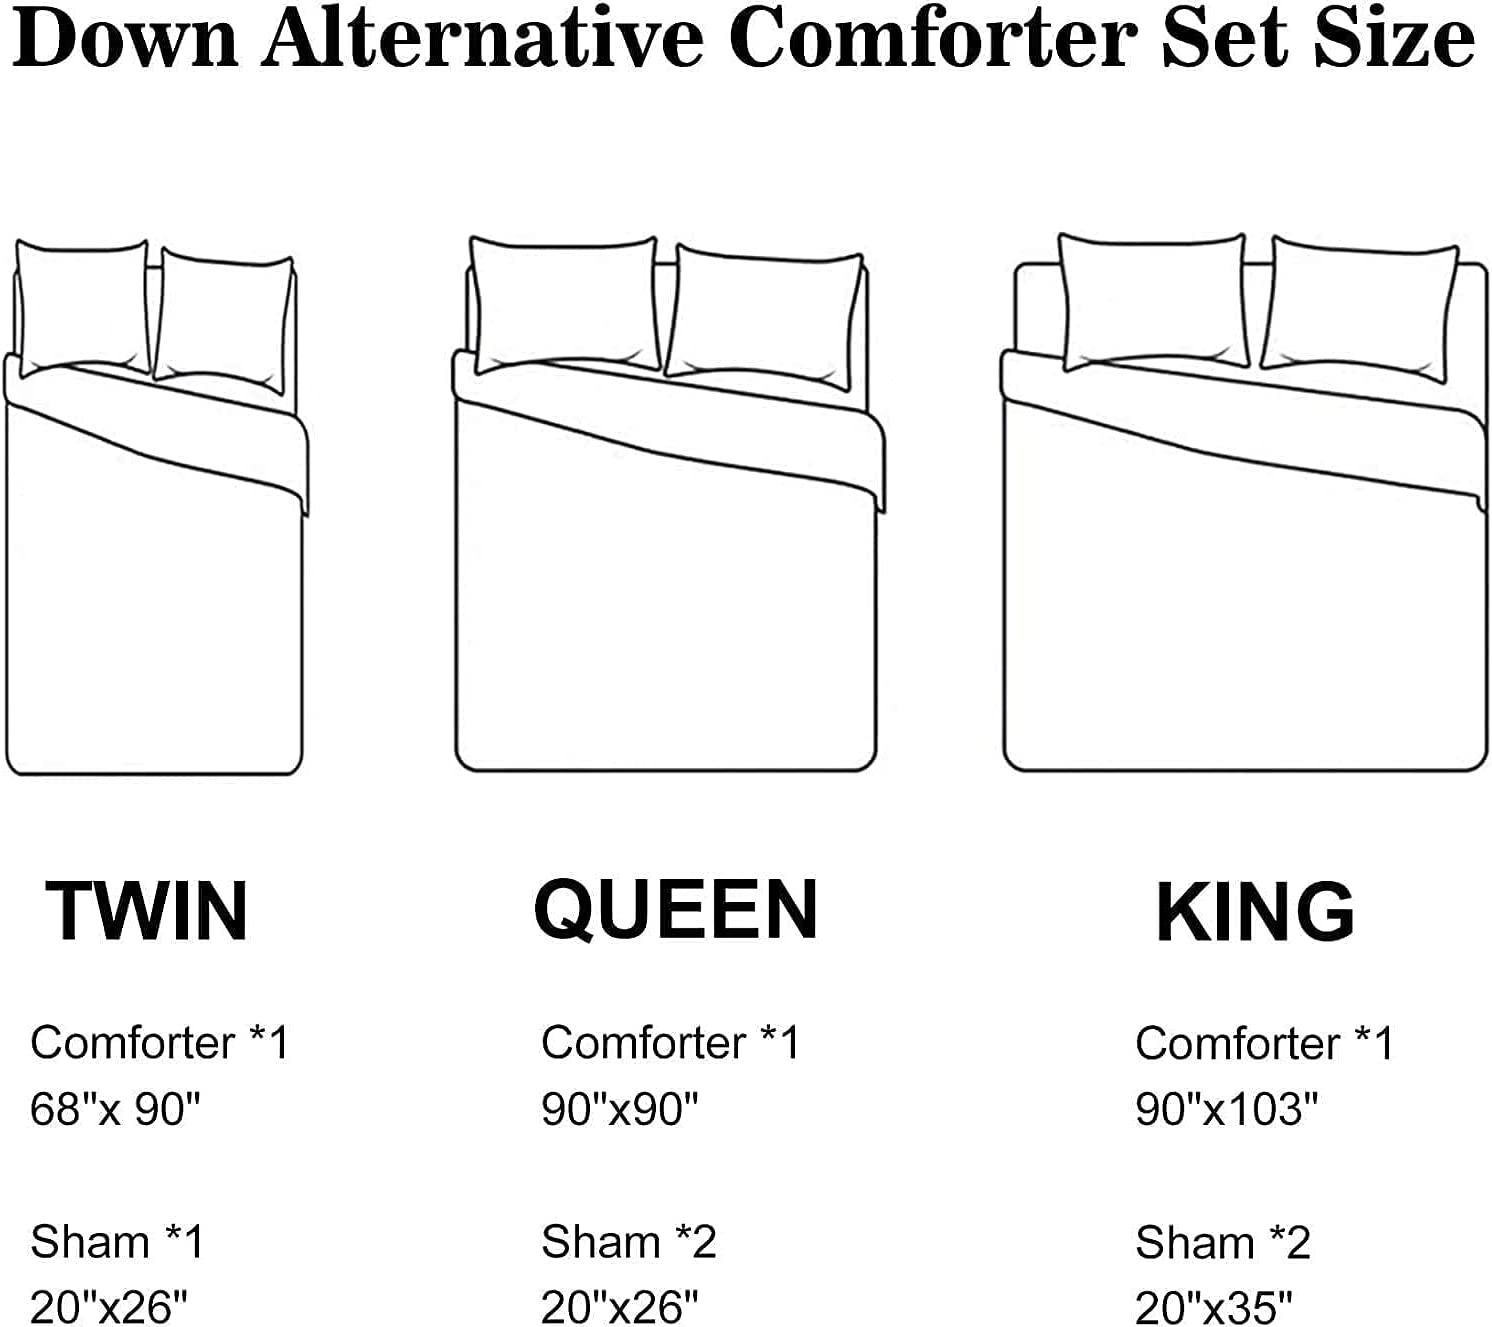 Shatex Blue Comforter King Cal King Size Comforter Set Blue 3 Pieces – Ultra Soft 100% Microfiber Polyester – King Comforter Set Bed with 2 Pillow Shams